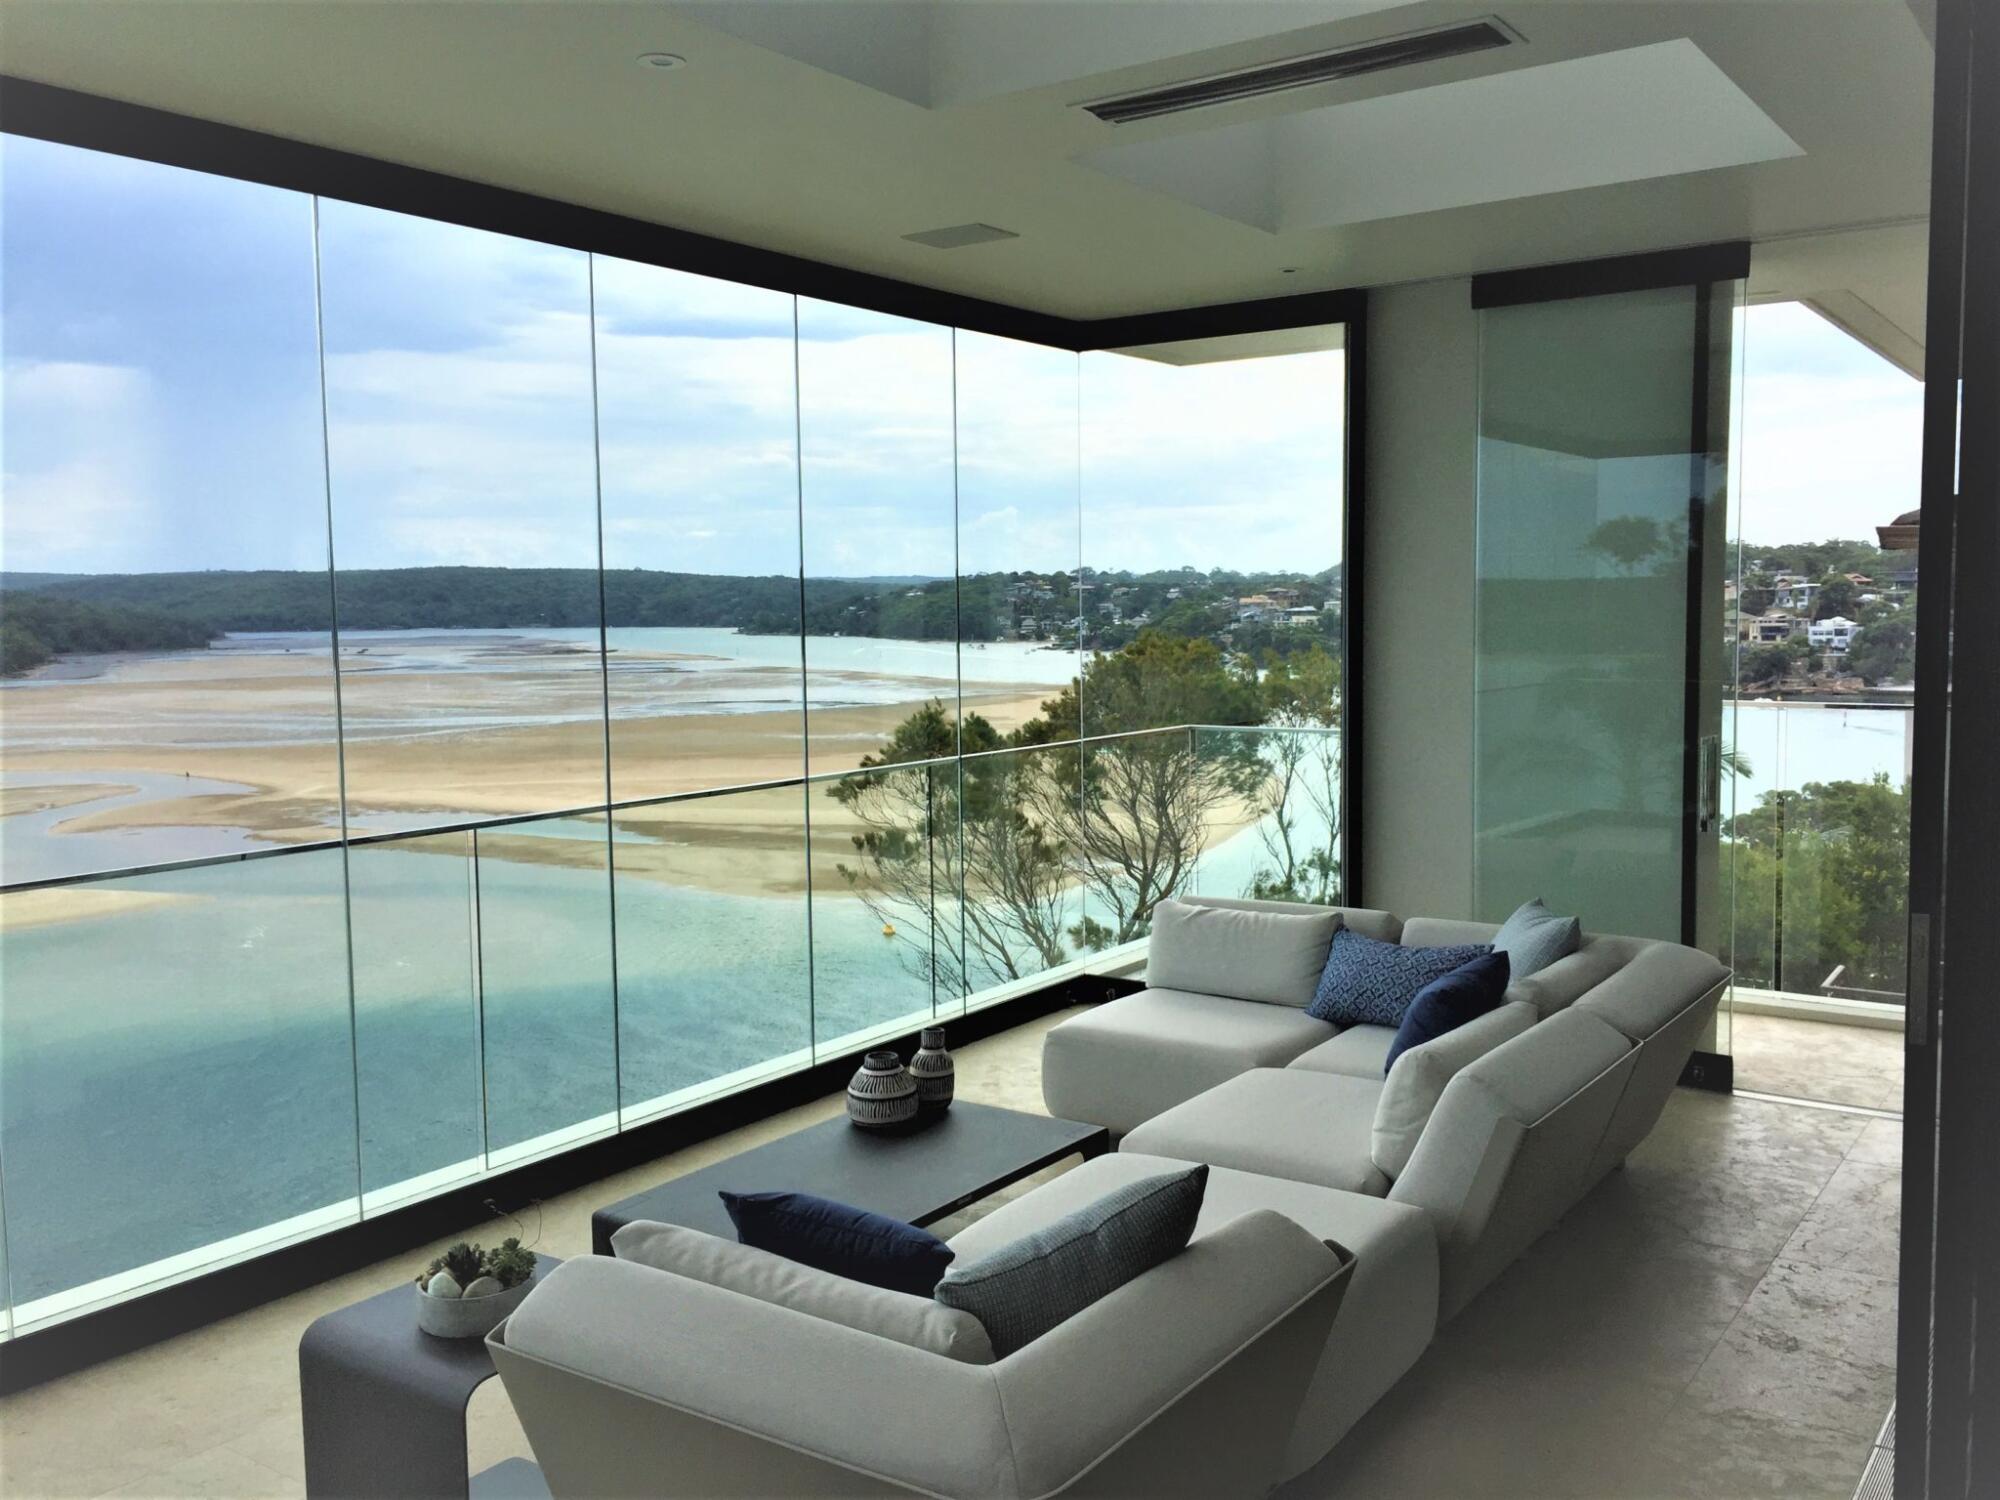 A living room with large architectural glass windows overlooking a lake.